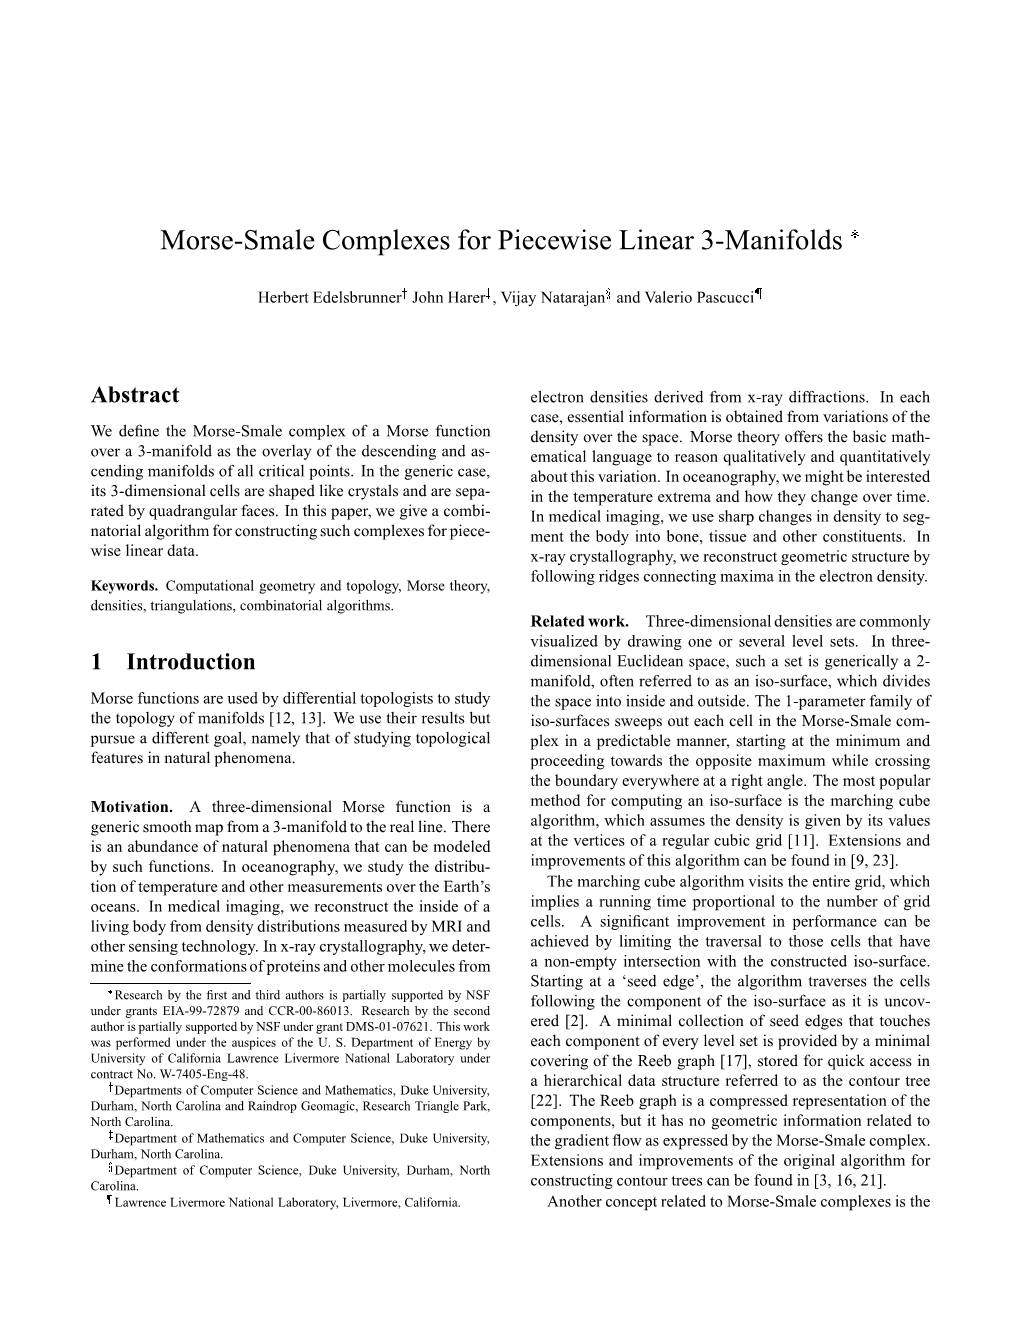 Morse-Smale Complexes for Piecewise Linear 3-Manifolds